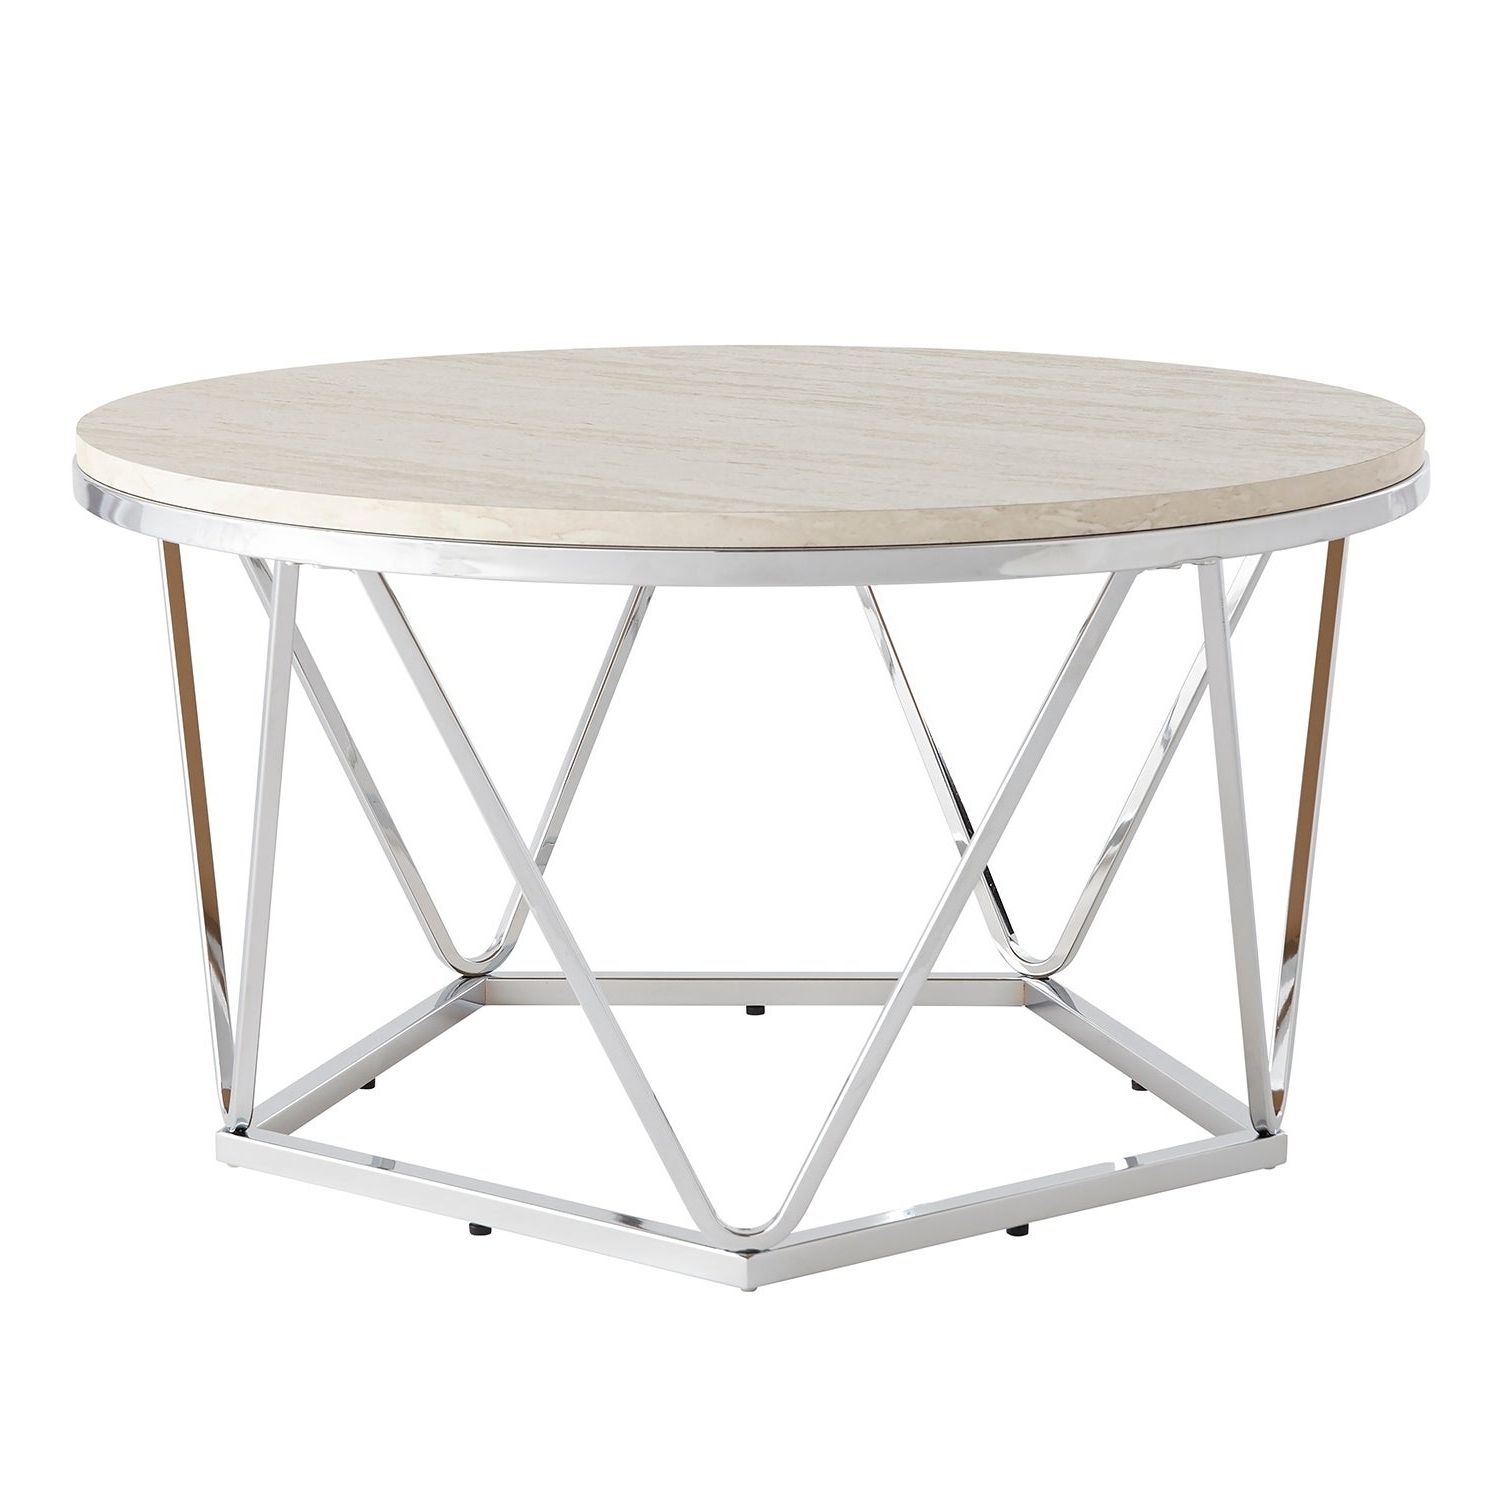 Favorite Silver Orchid Henderson Faux Stone Silvertone Round Coffee Tables Regarding Silver Orchid Henderson Faux Stone Silvertone Round Coffee Table (View 4 of 20)